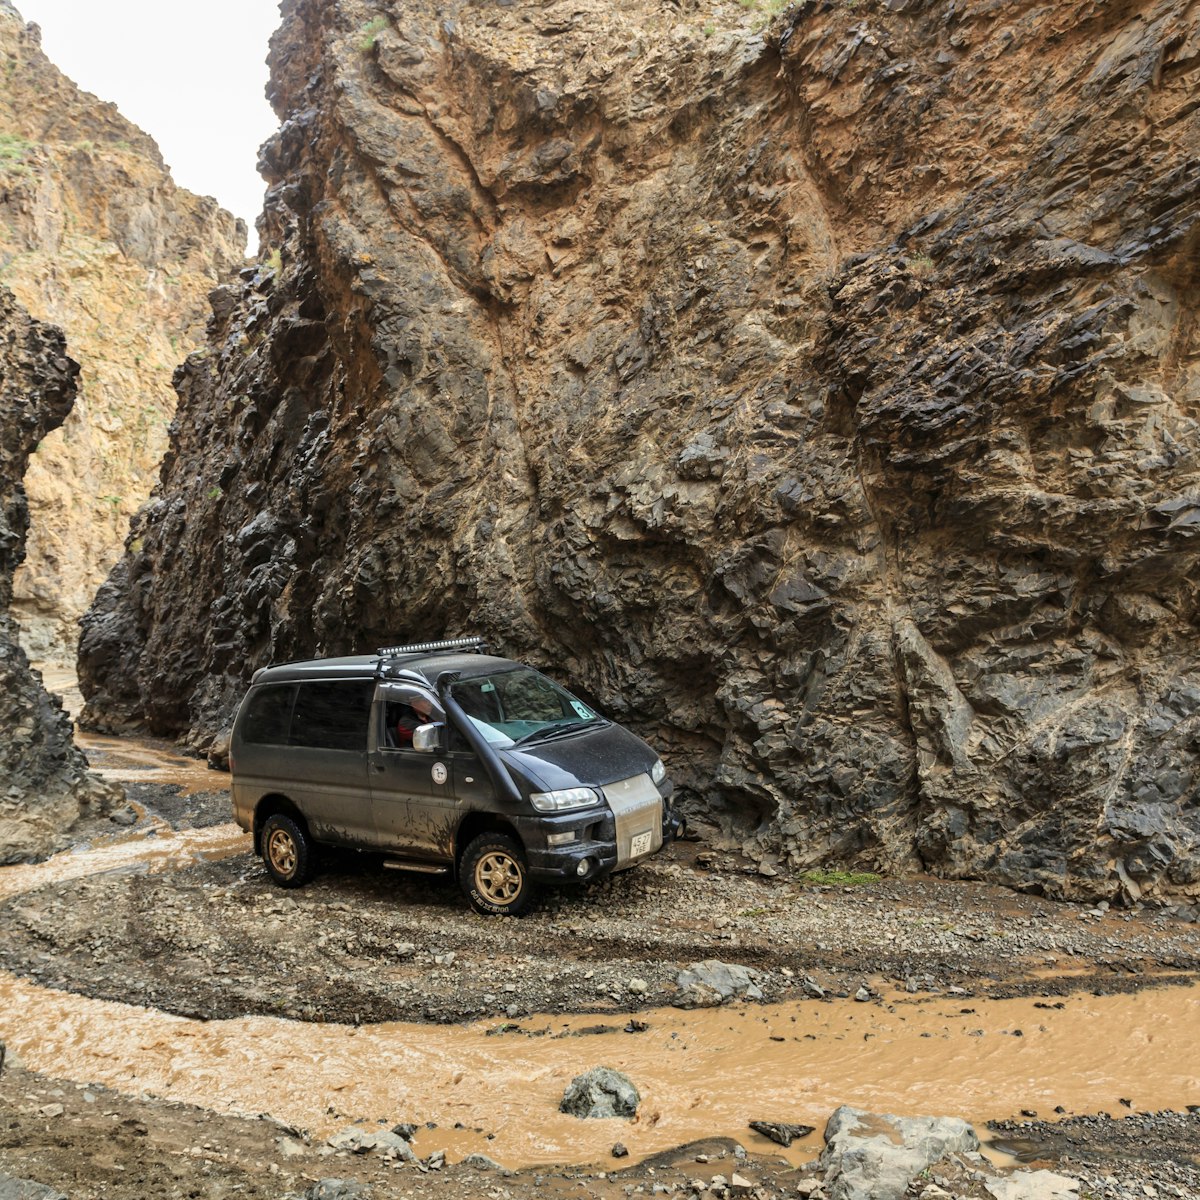 Off road vehicle travels an adventurous alternative and rocky route through Dugany Am, a spectacular narrow gorge in the mountains of the Gobi, Gurvan Saikhan National Park, Mongolia.